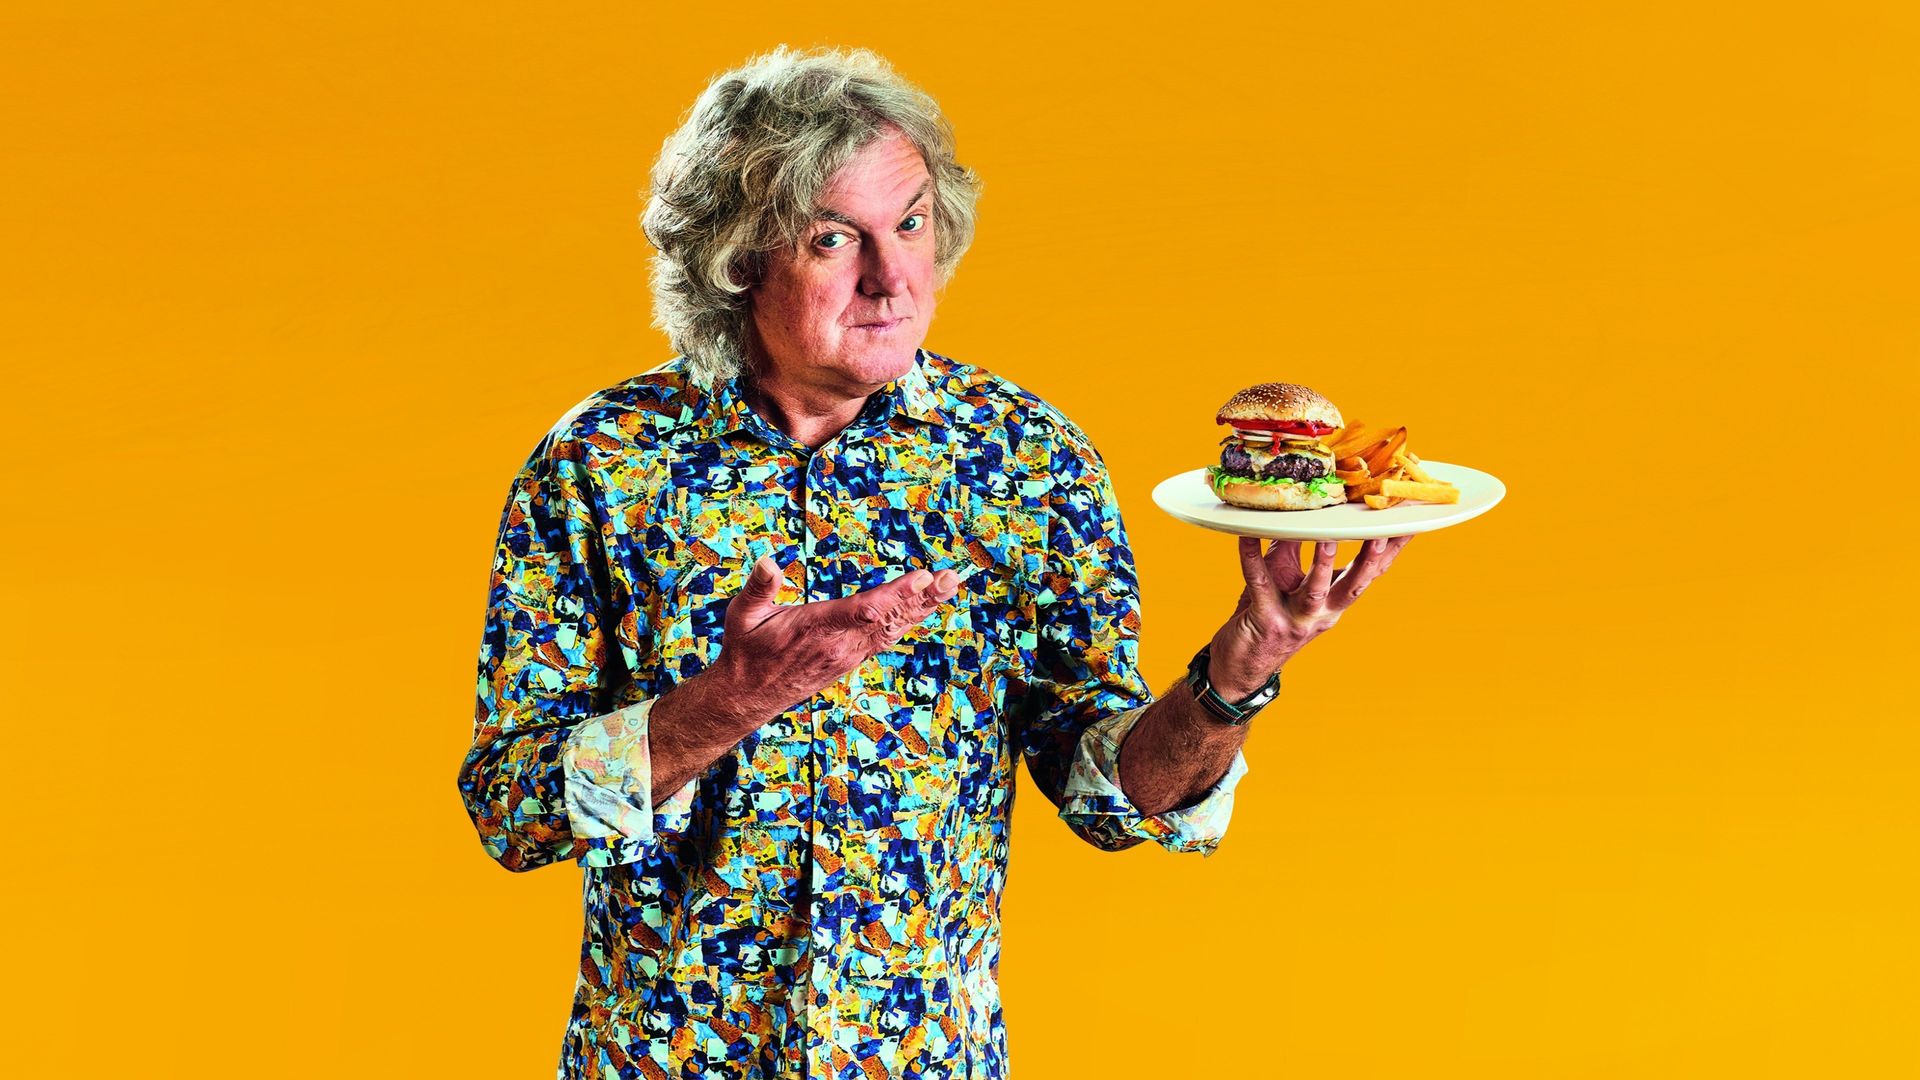 James May: Oh Cook! Backdrop